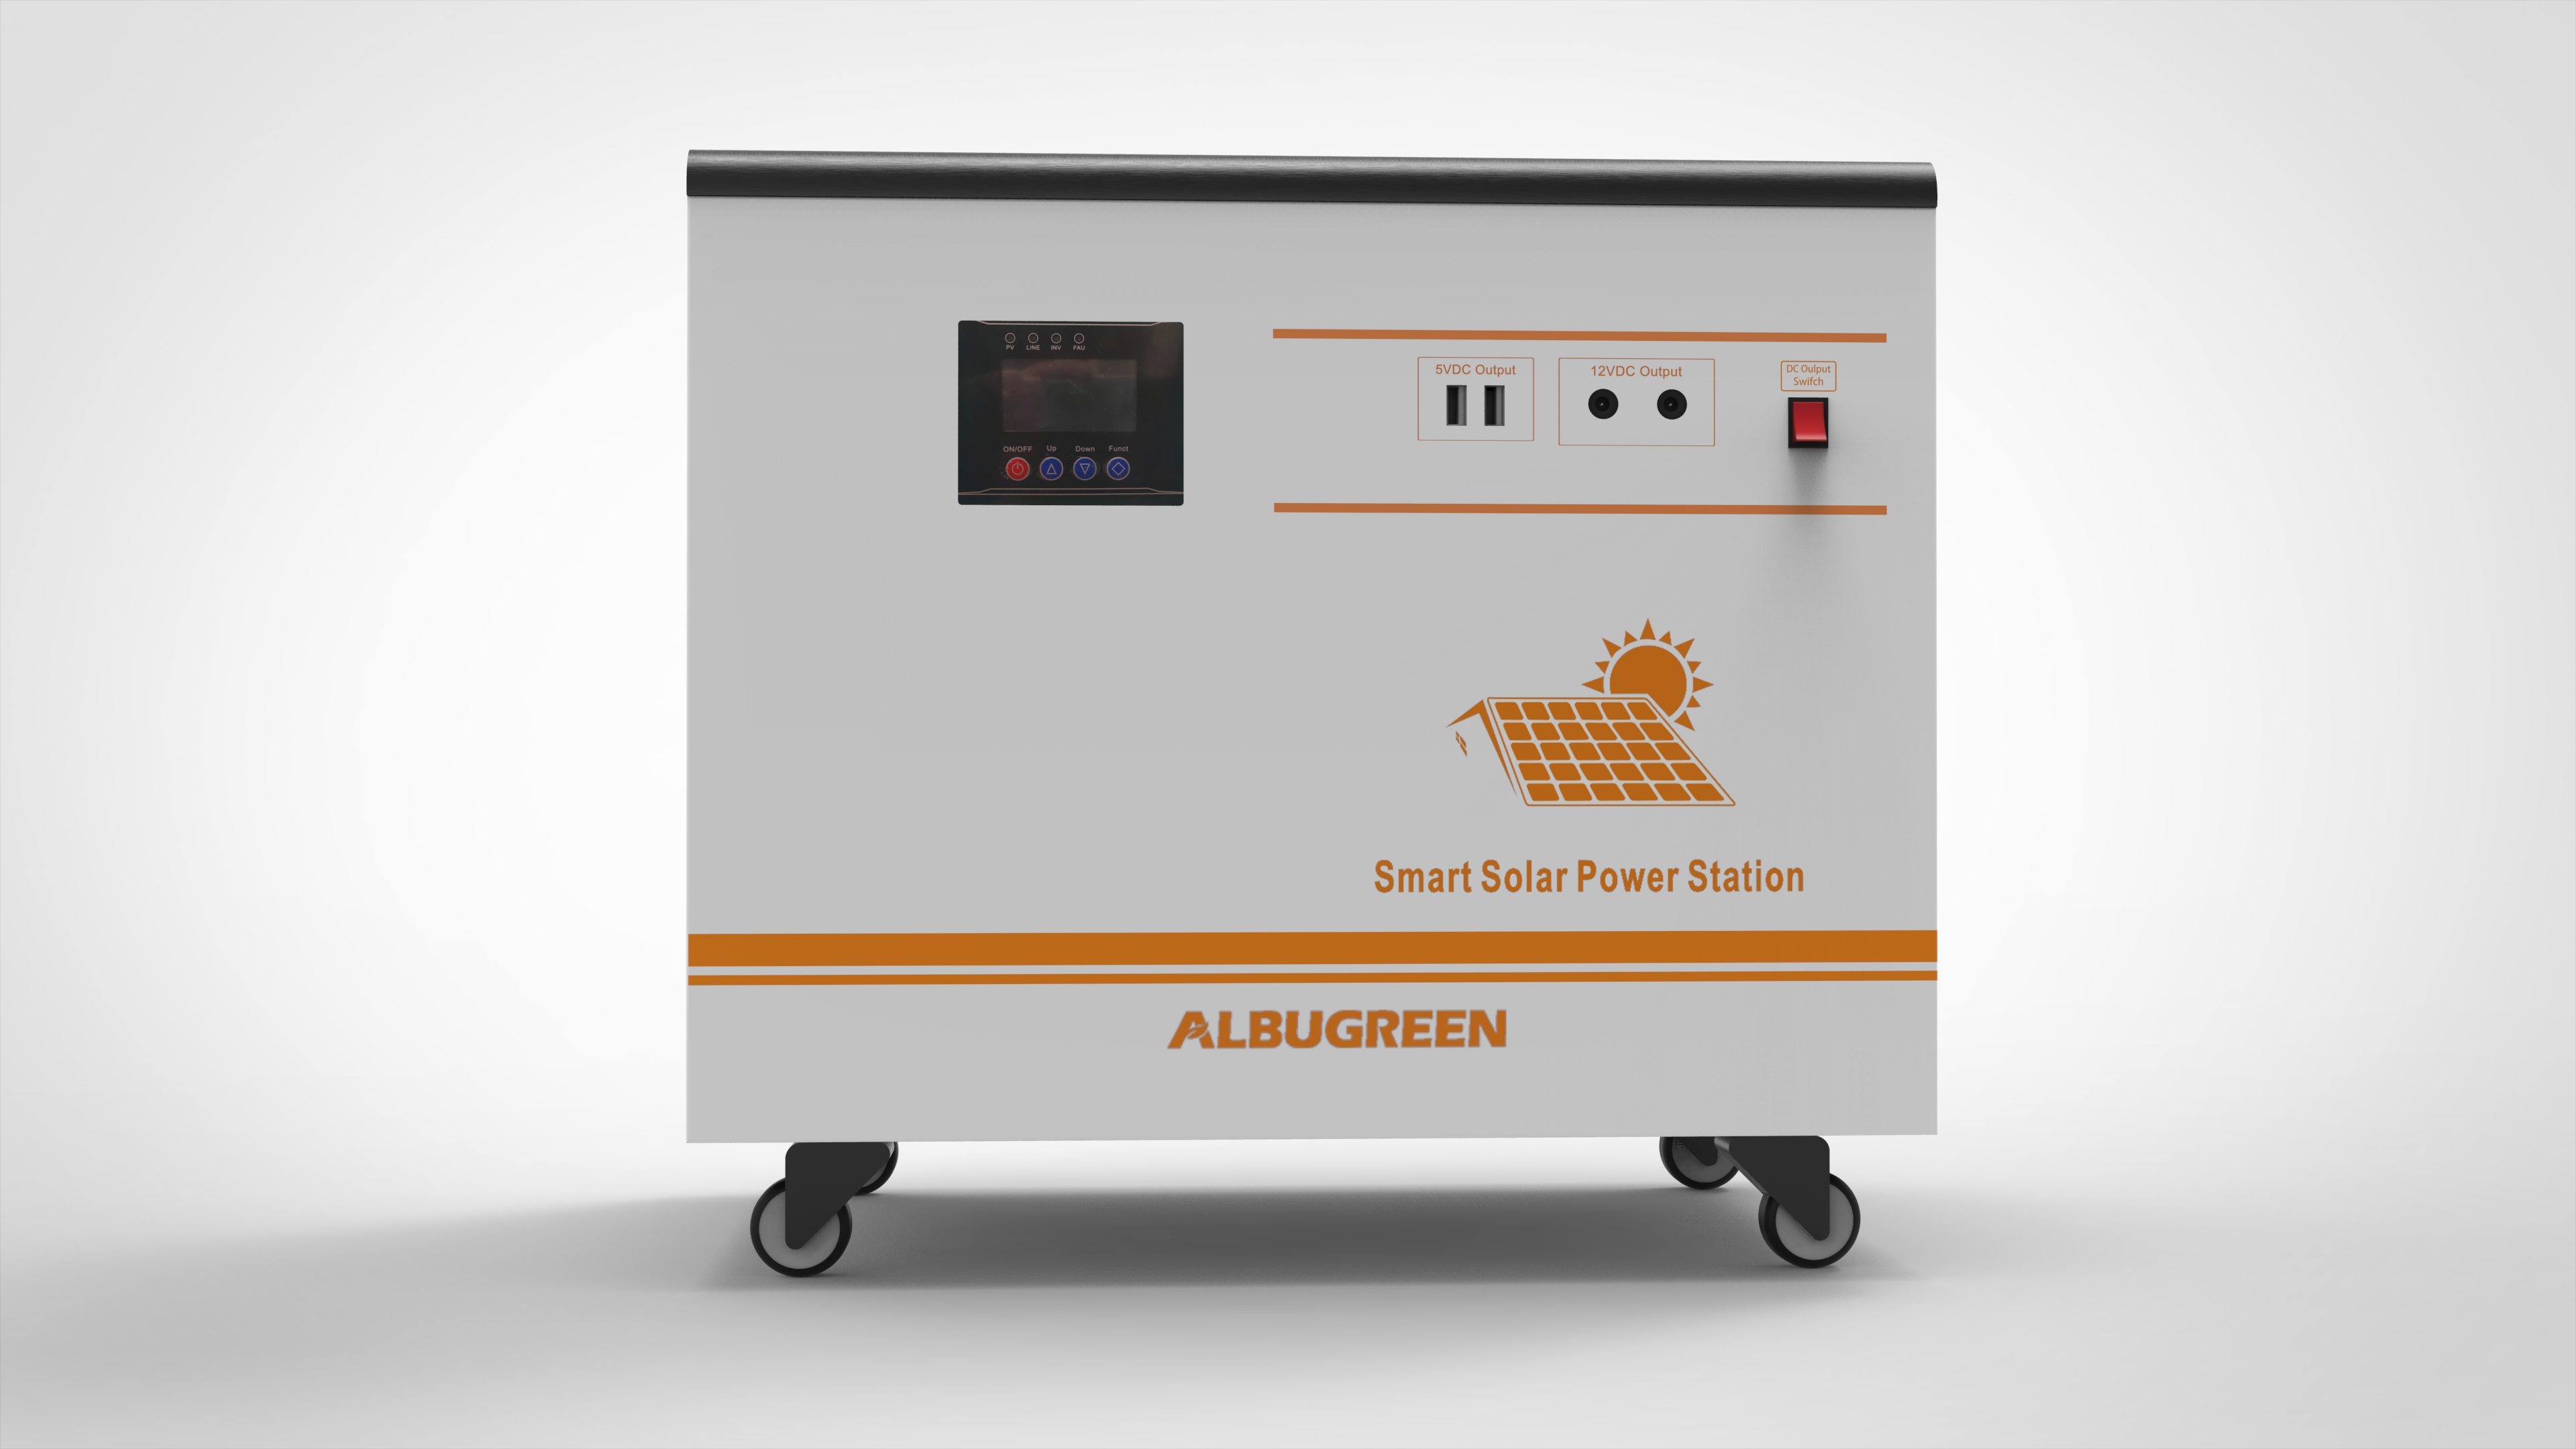 3000w 220v Electric in One Solar Power System for The Home